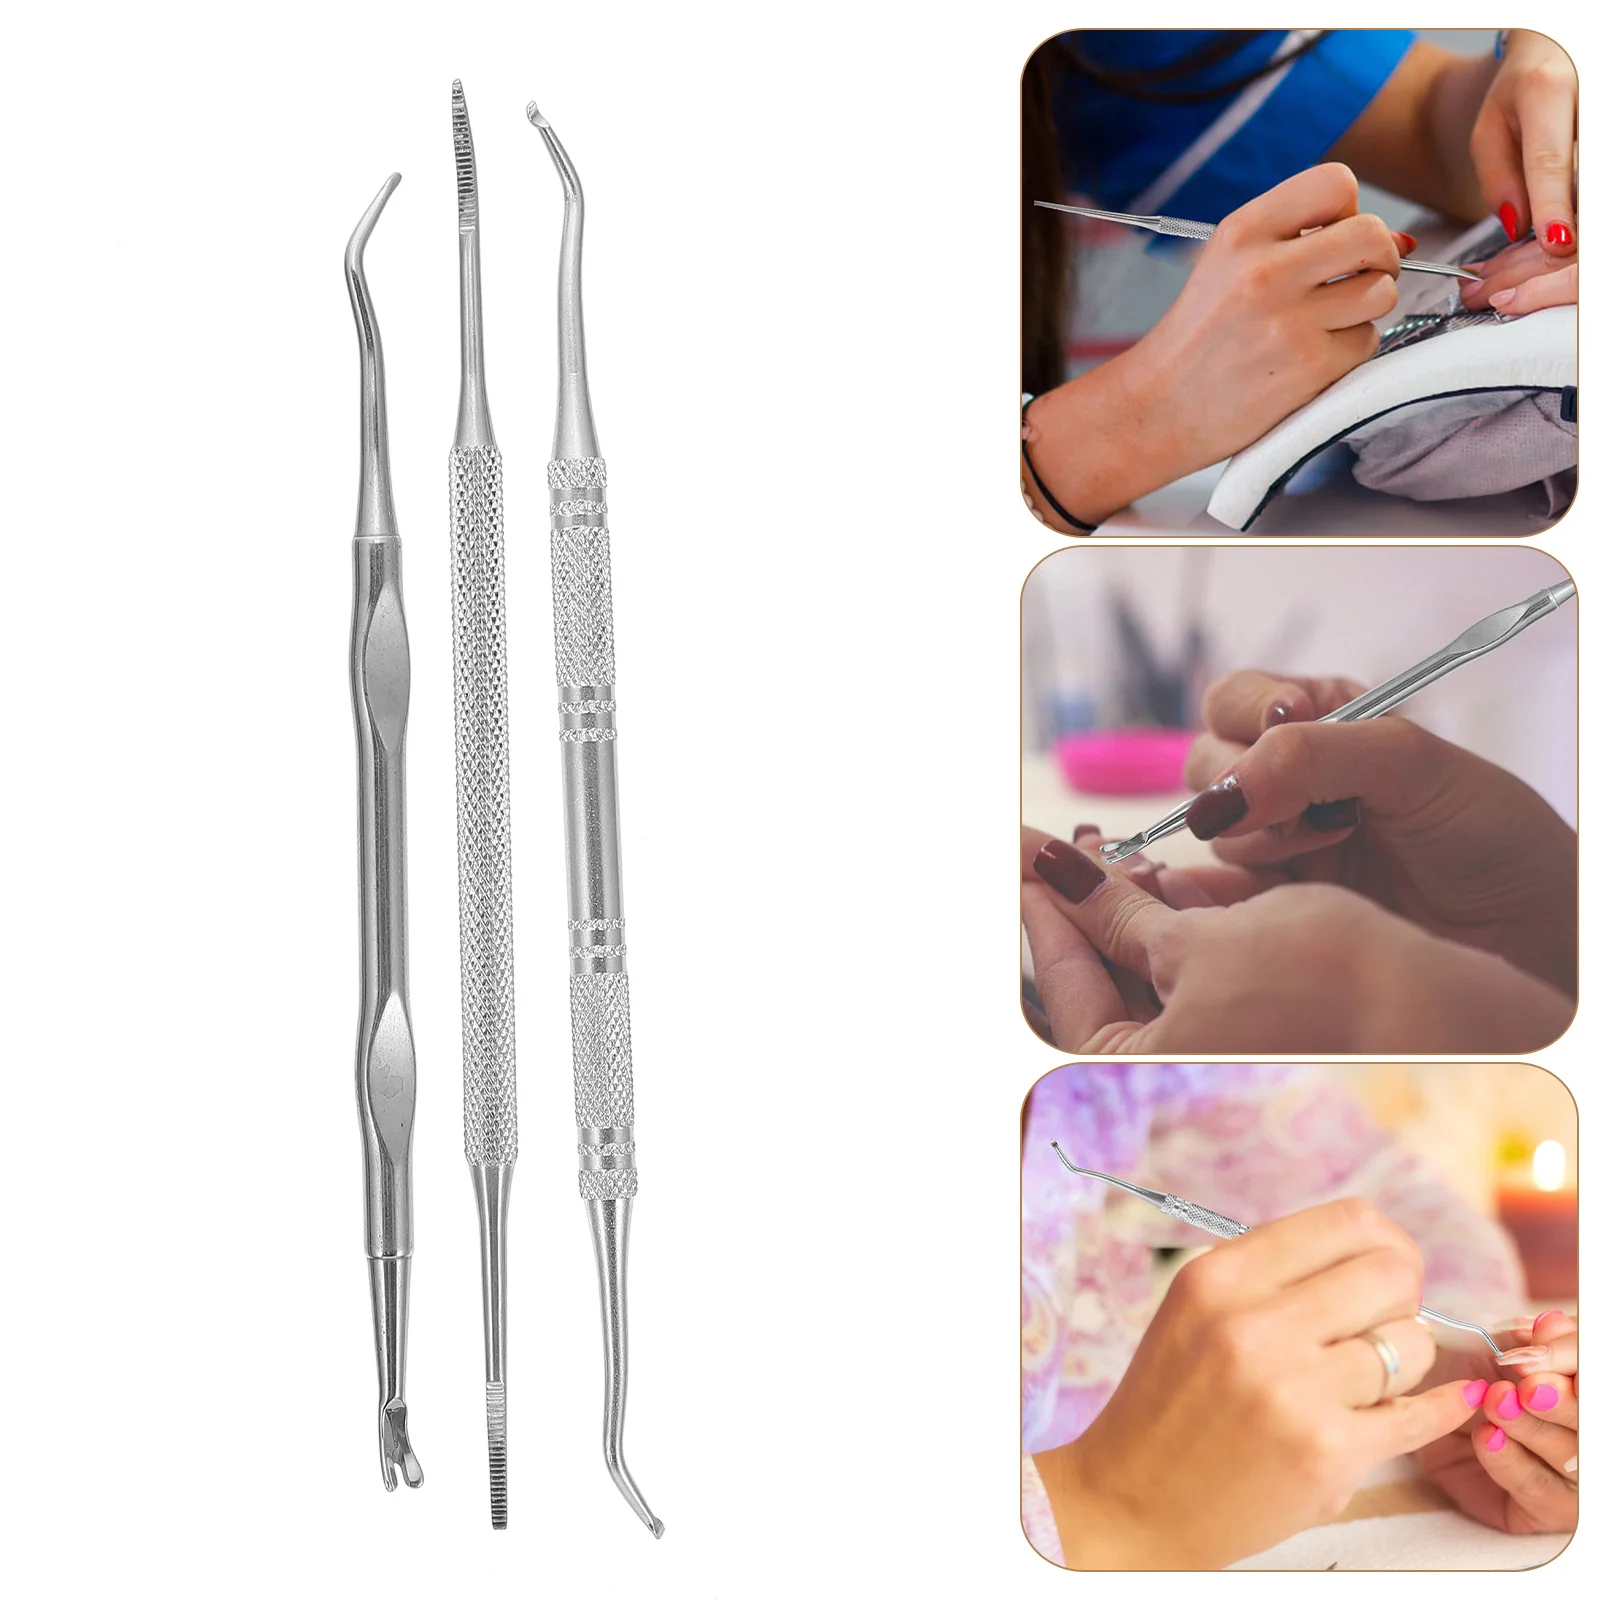 3 Pcs Nail Remover Practical Toenail File Kit Pedicure Tool Ingrown Double-end Cleaner Professional Lifter Dedicated Cleaning light measuring instrument dedicated color temperature stick adjustable color professional grade pen